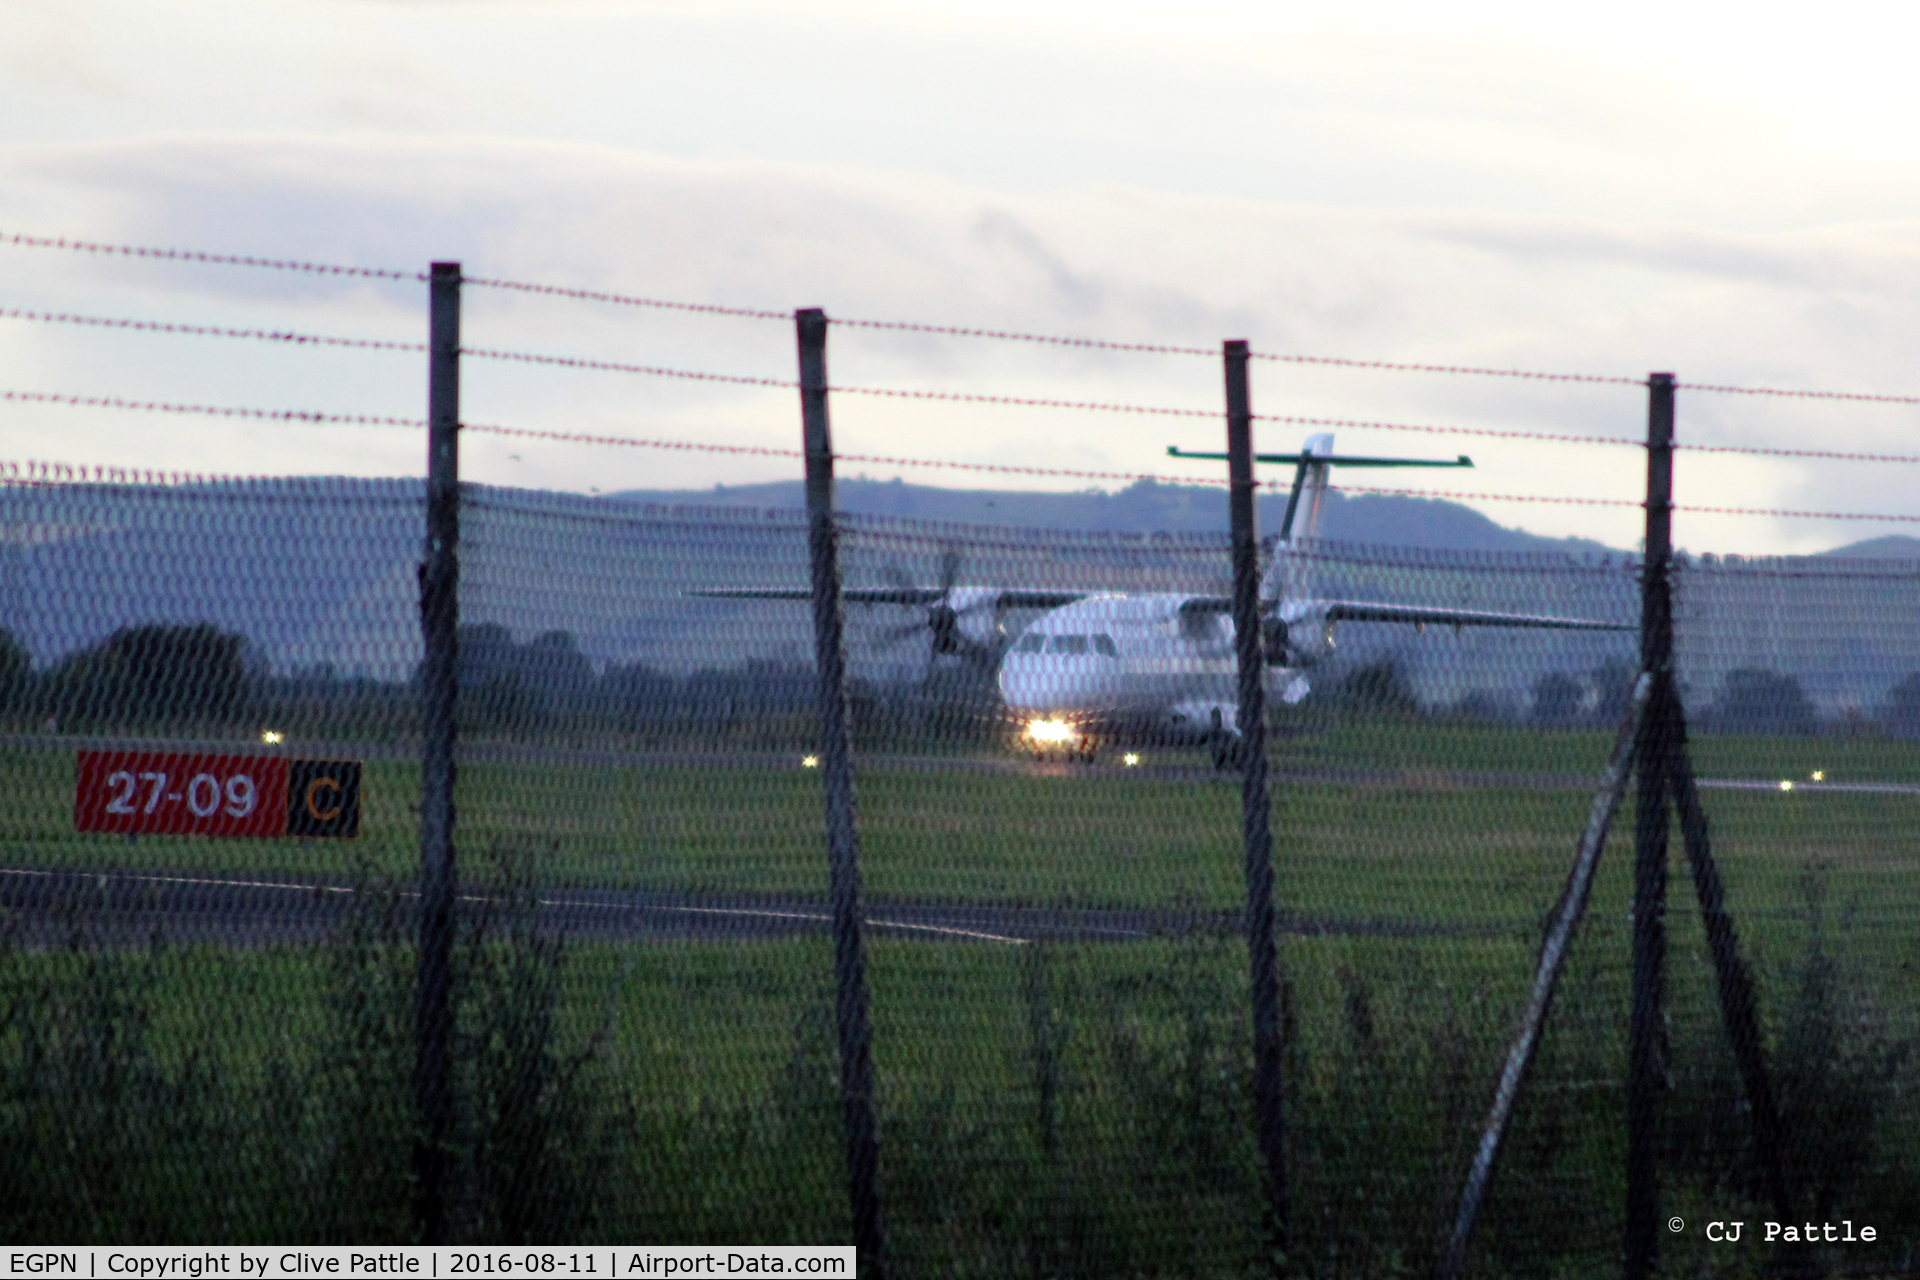 Dundee Airport, Dundee, Scotland United Kingdom (EGPN) - Through the fence shot in the failing light at Dundee EGPN - Dornier Do328-100 G-BYHG back tracks to the terminal.